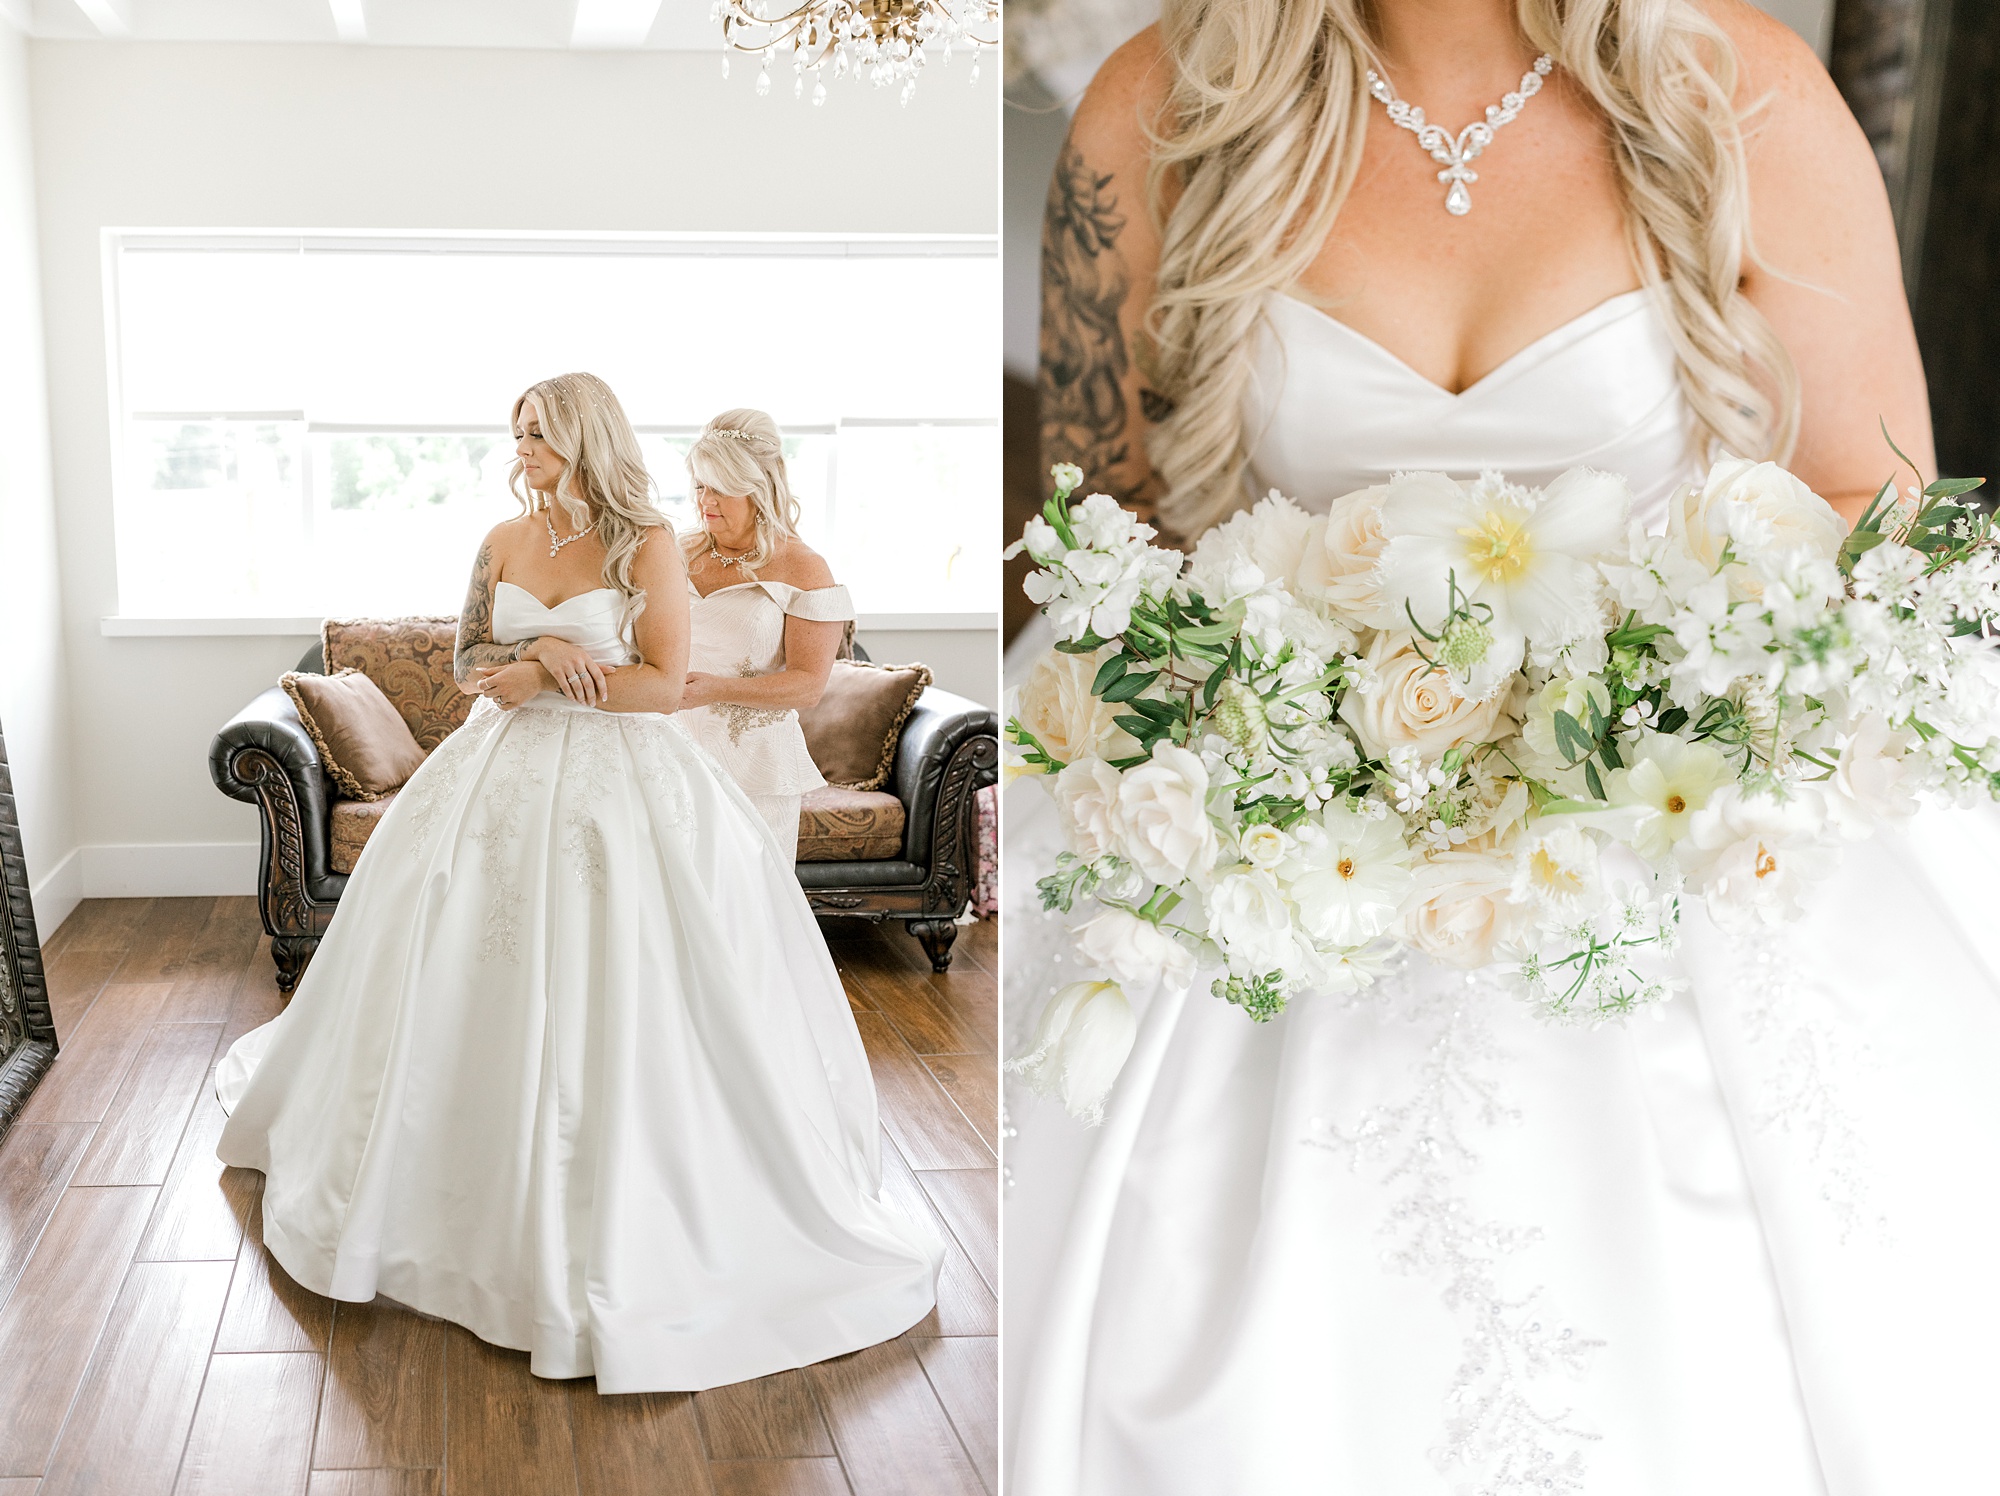 mother helps bride into strapless wedding gown in bridal suite at the Refinery at Perona Farms